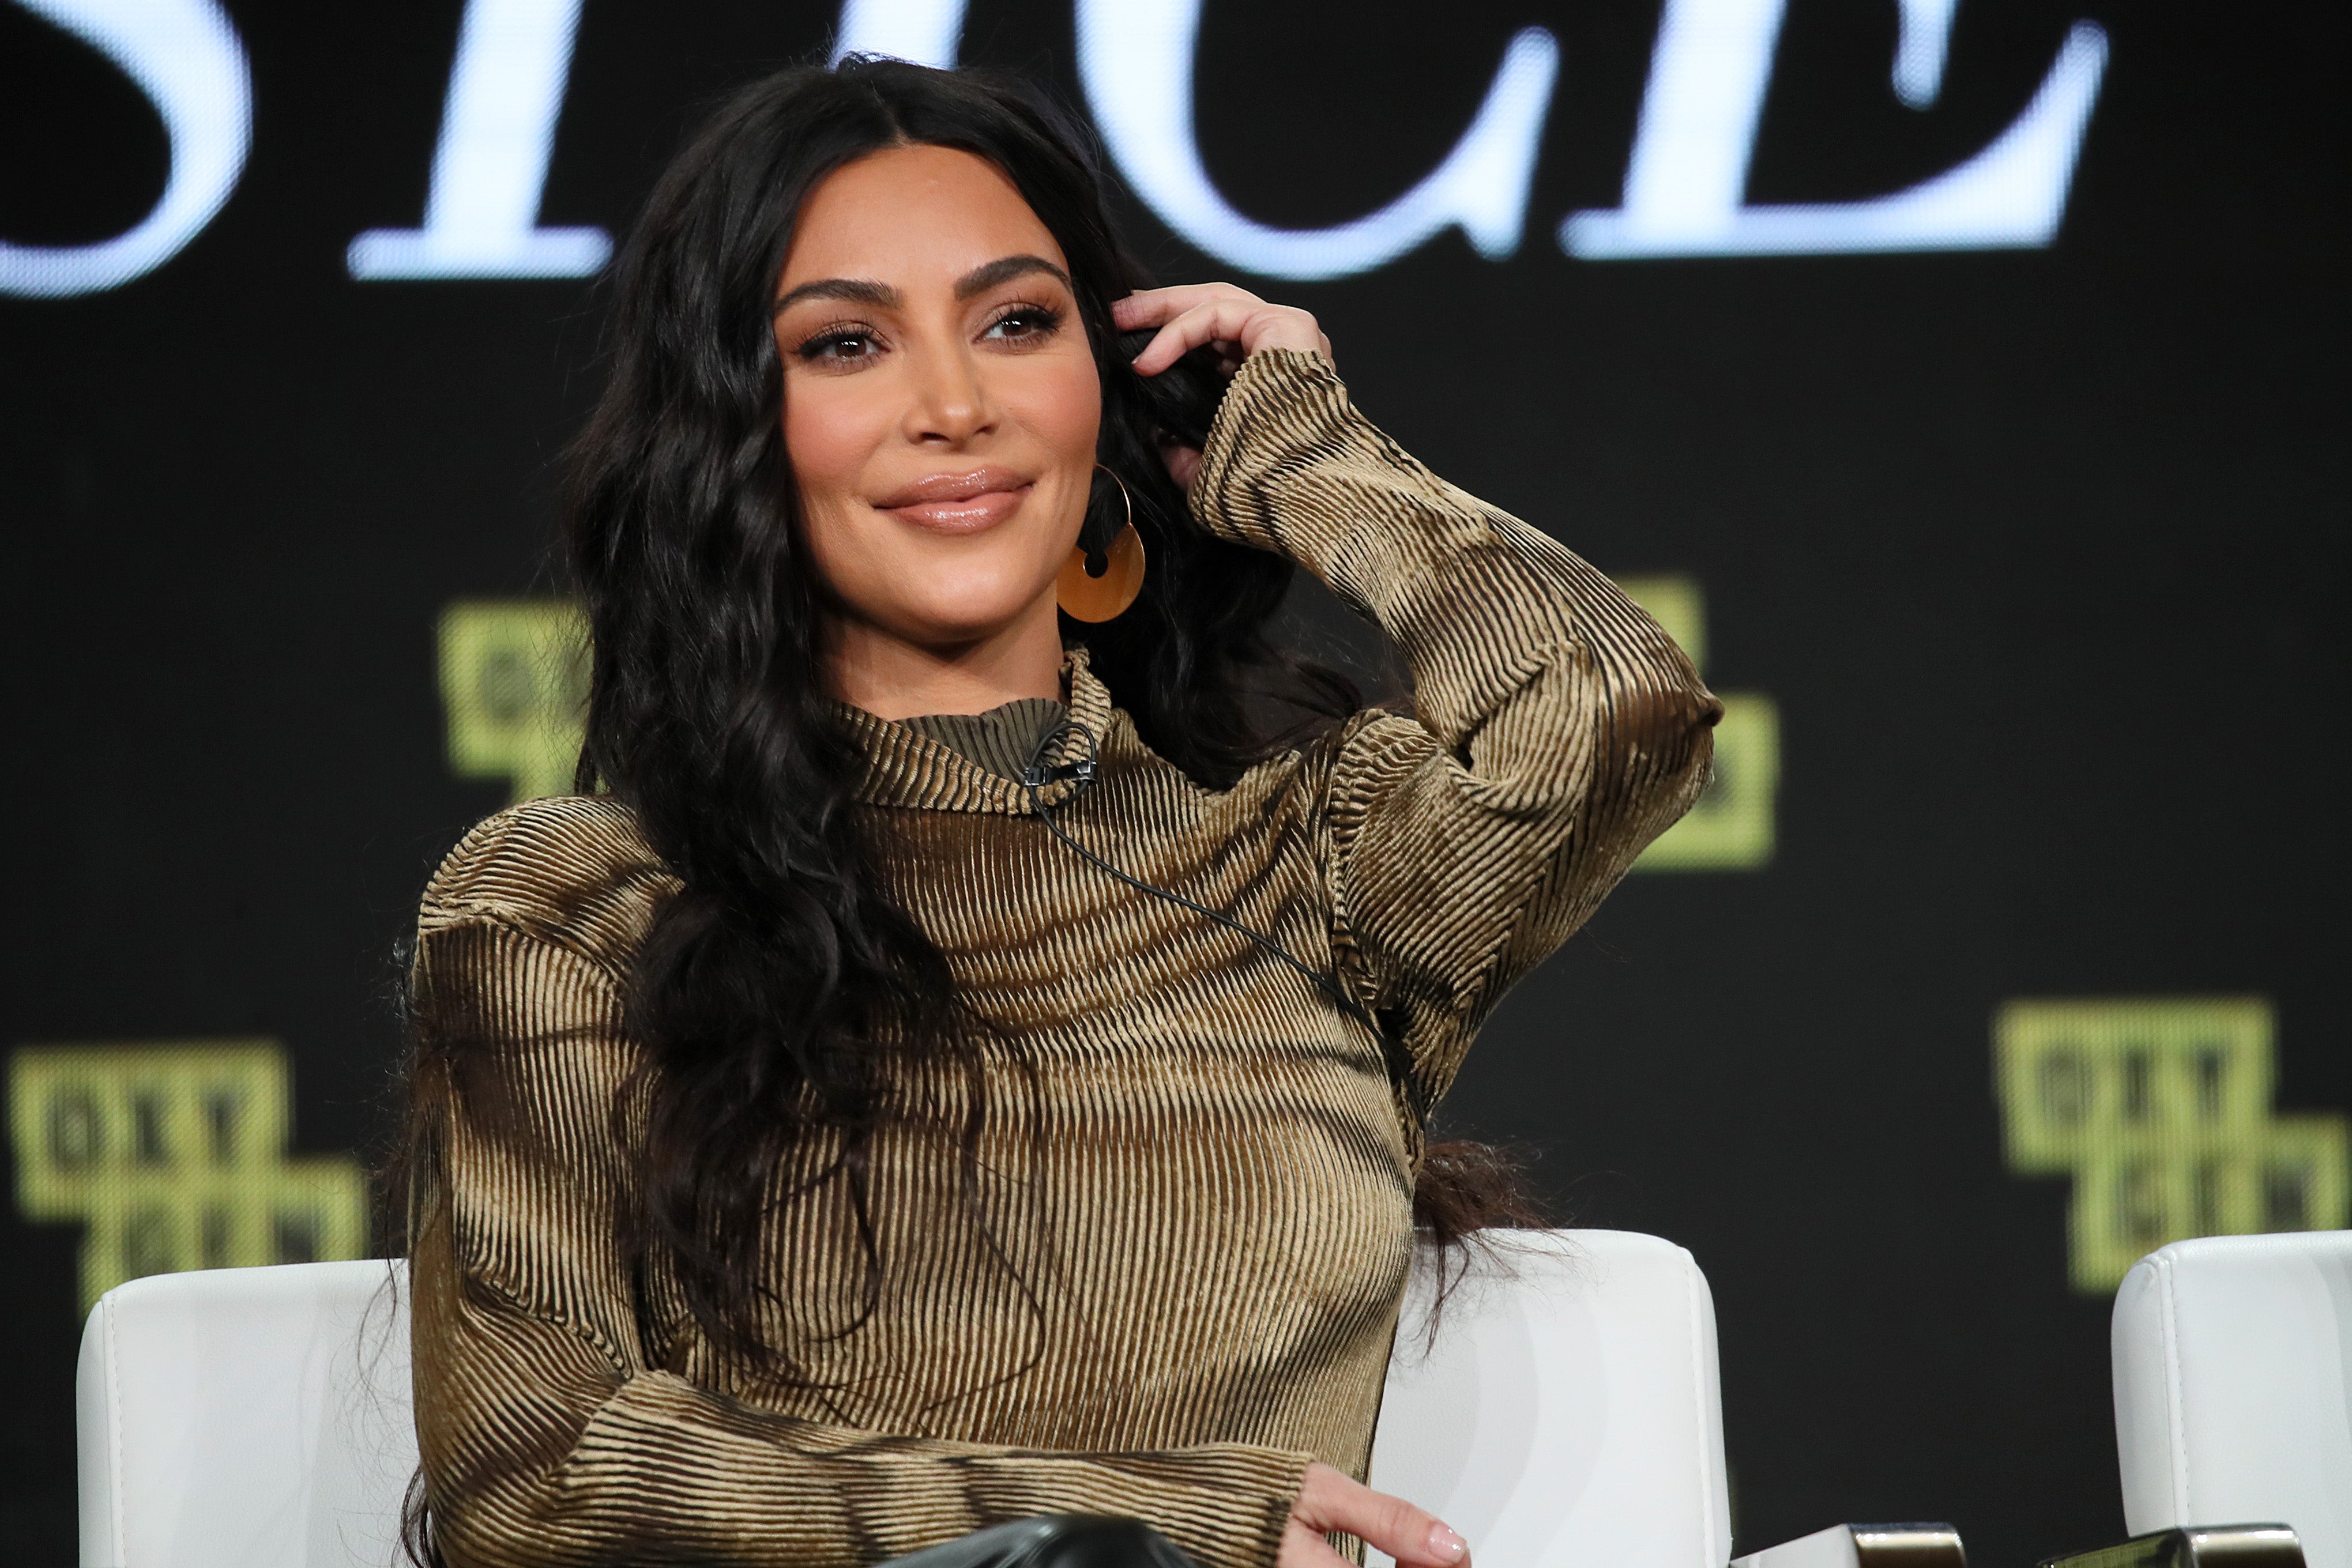 As the second-eldest, Kim Kardashian is the wealthiest family member